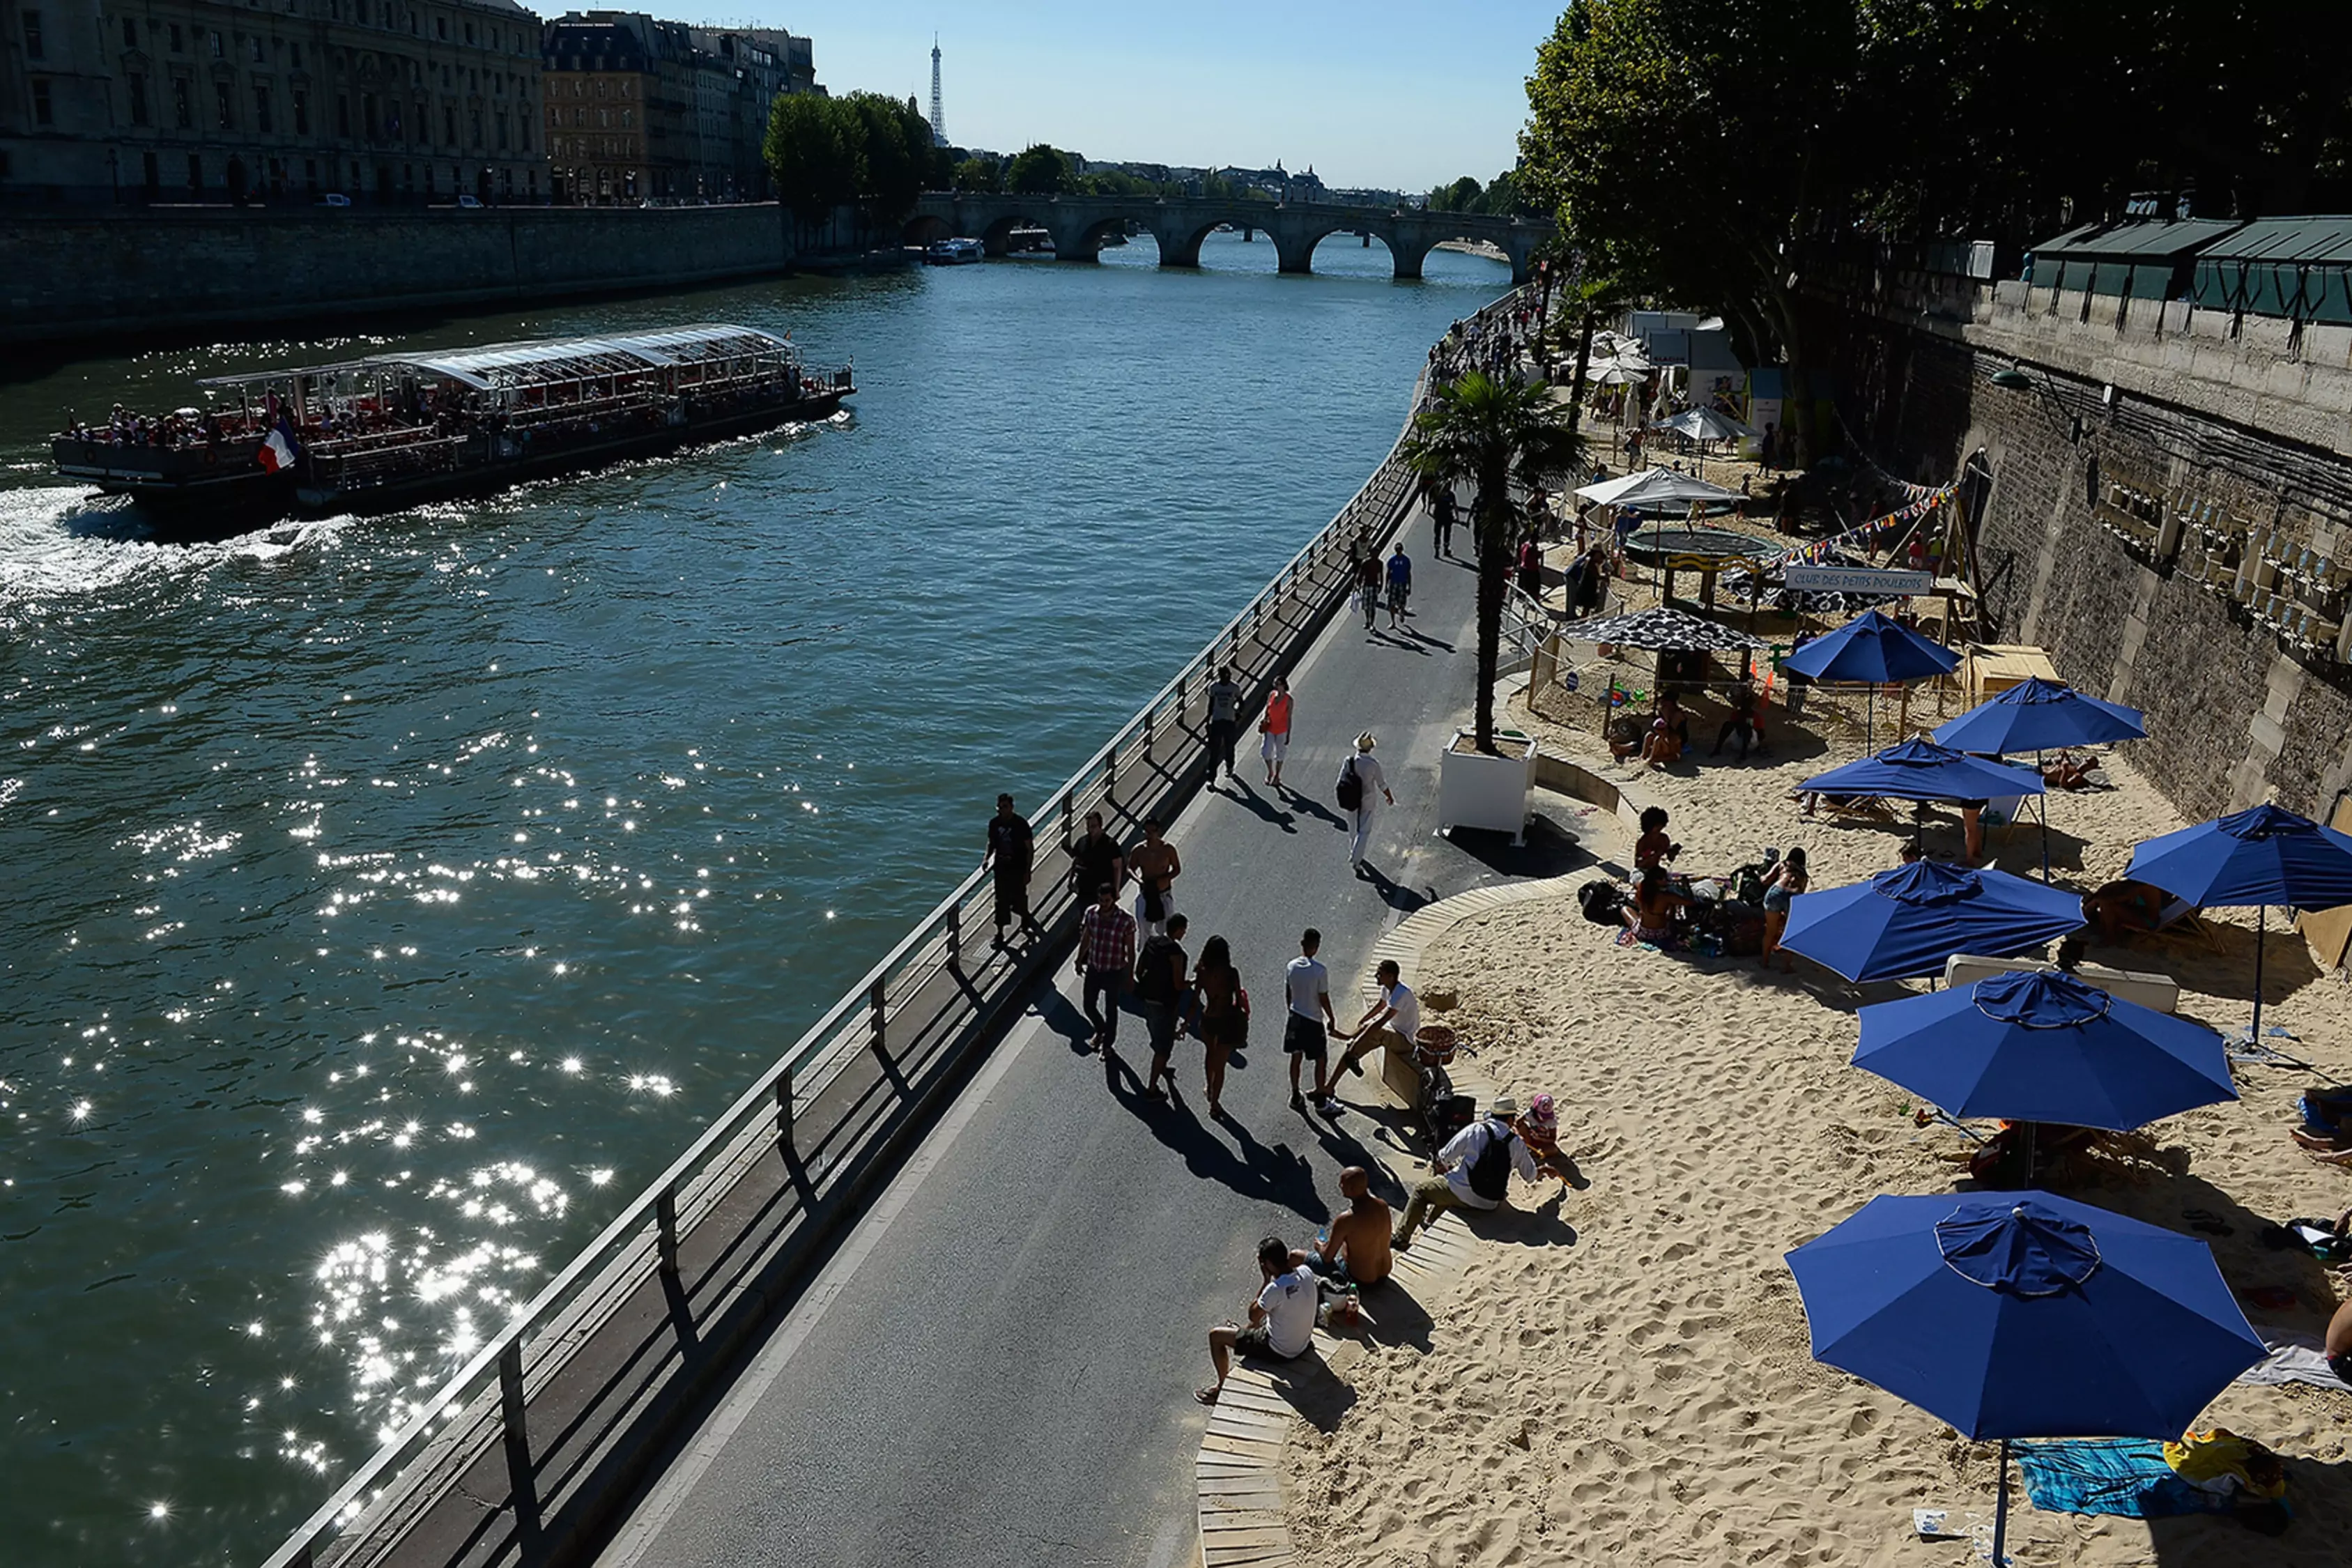 General view of "Paris Plage", an artificial beach set up on the right bank of the Seine river in Paris